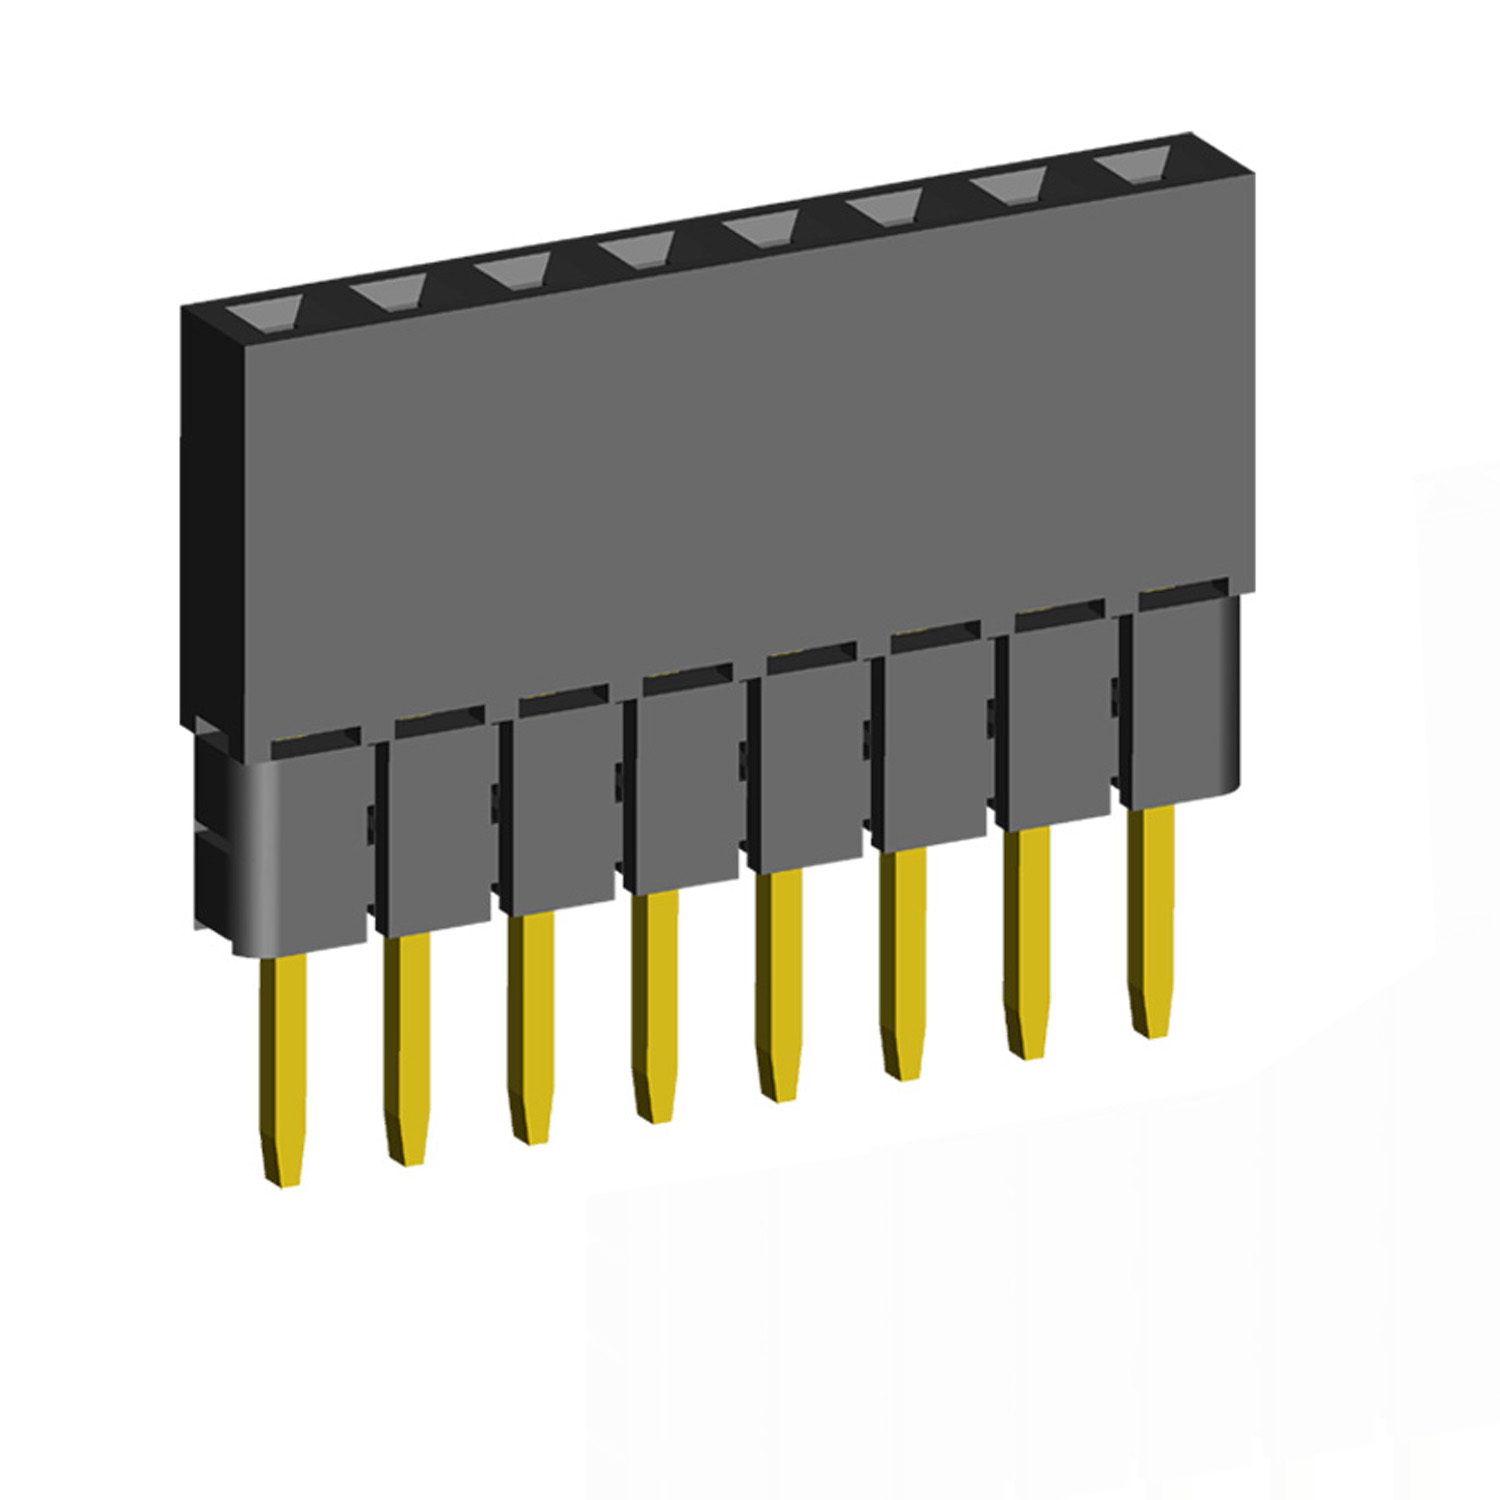 2209SDI-XXG-2B series, straight single-row sockets with increased insulator on the Board for mounting in holes, pitch 2,0 mm, 1x40 pins